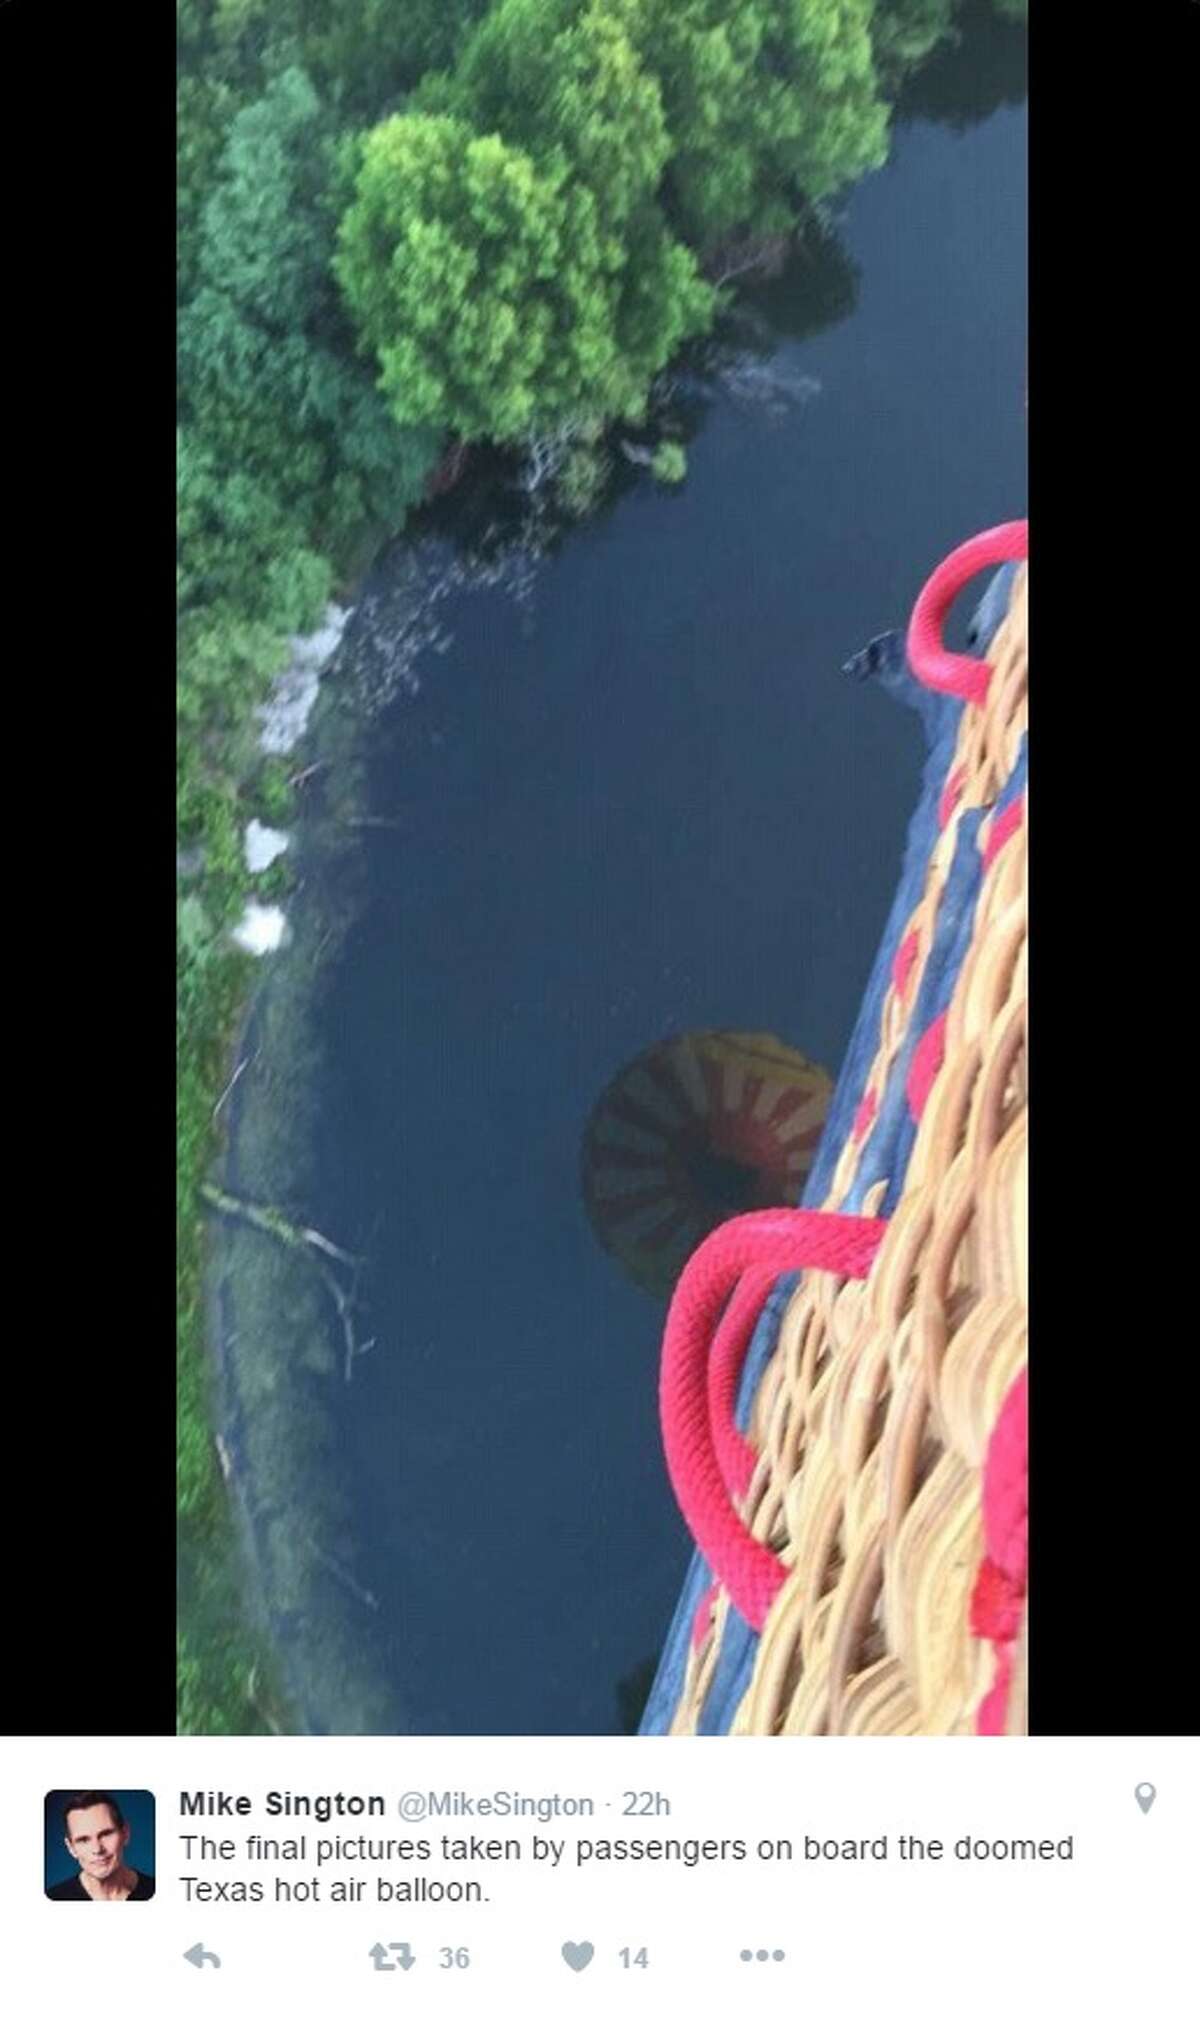 @MikeSington: "The final pictures taken by passengers on board the doomed Texas hot air balloon."